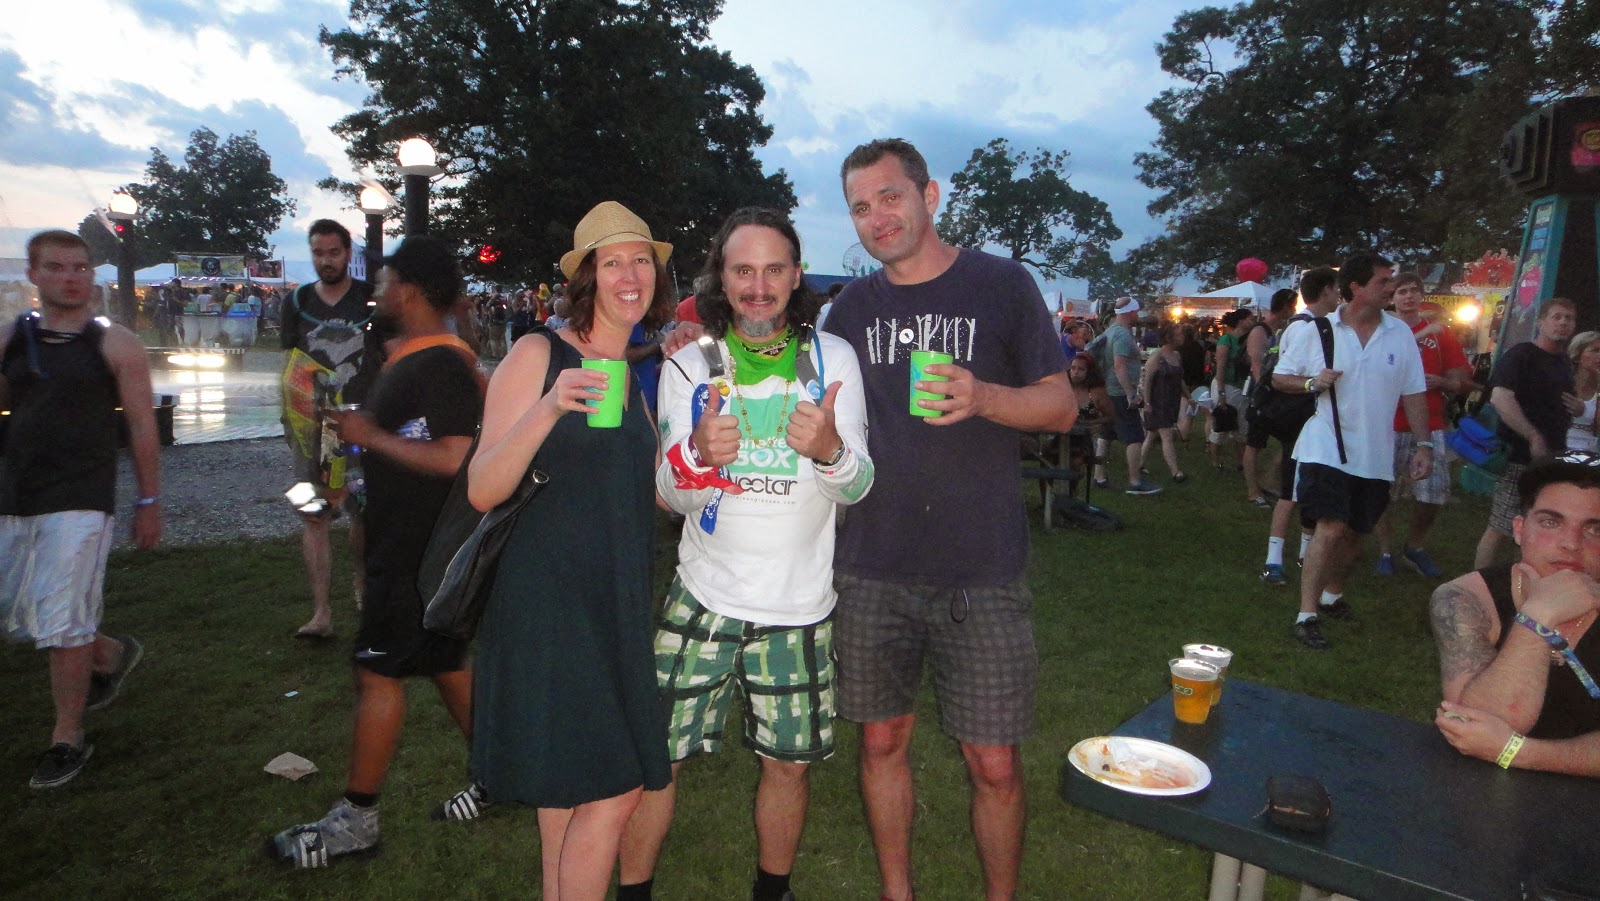 Bonnaroo Chris and a couple from Australia, 2014